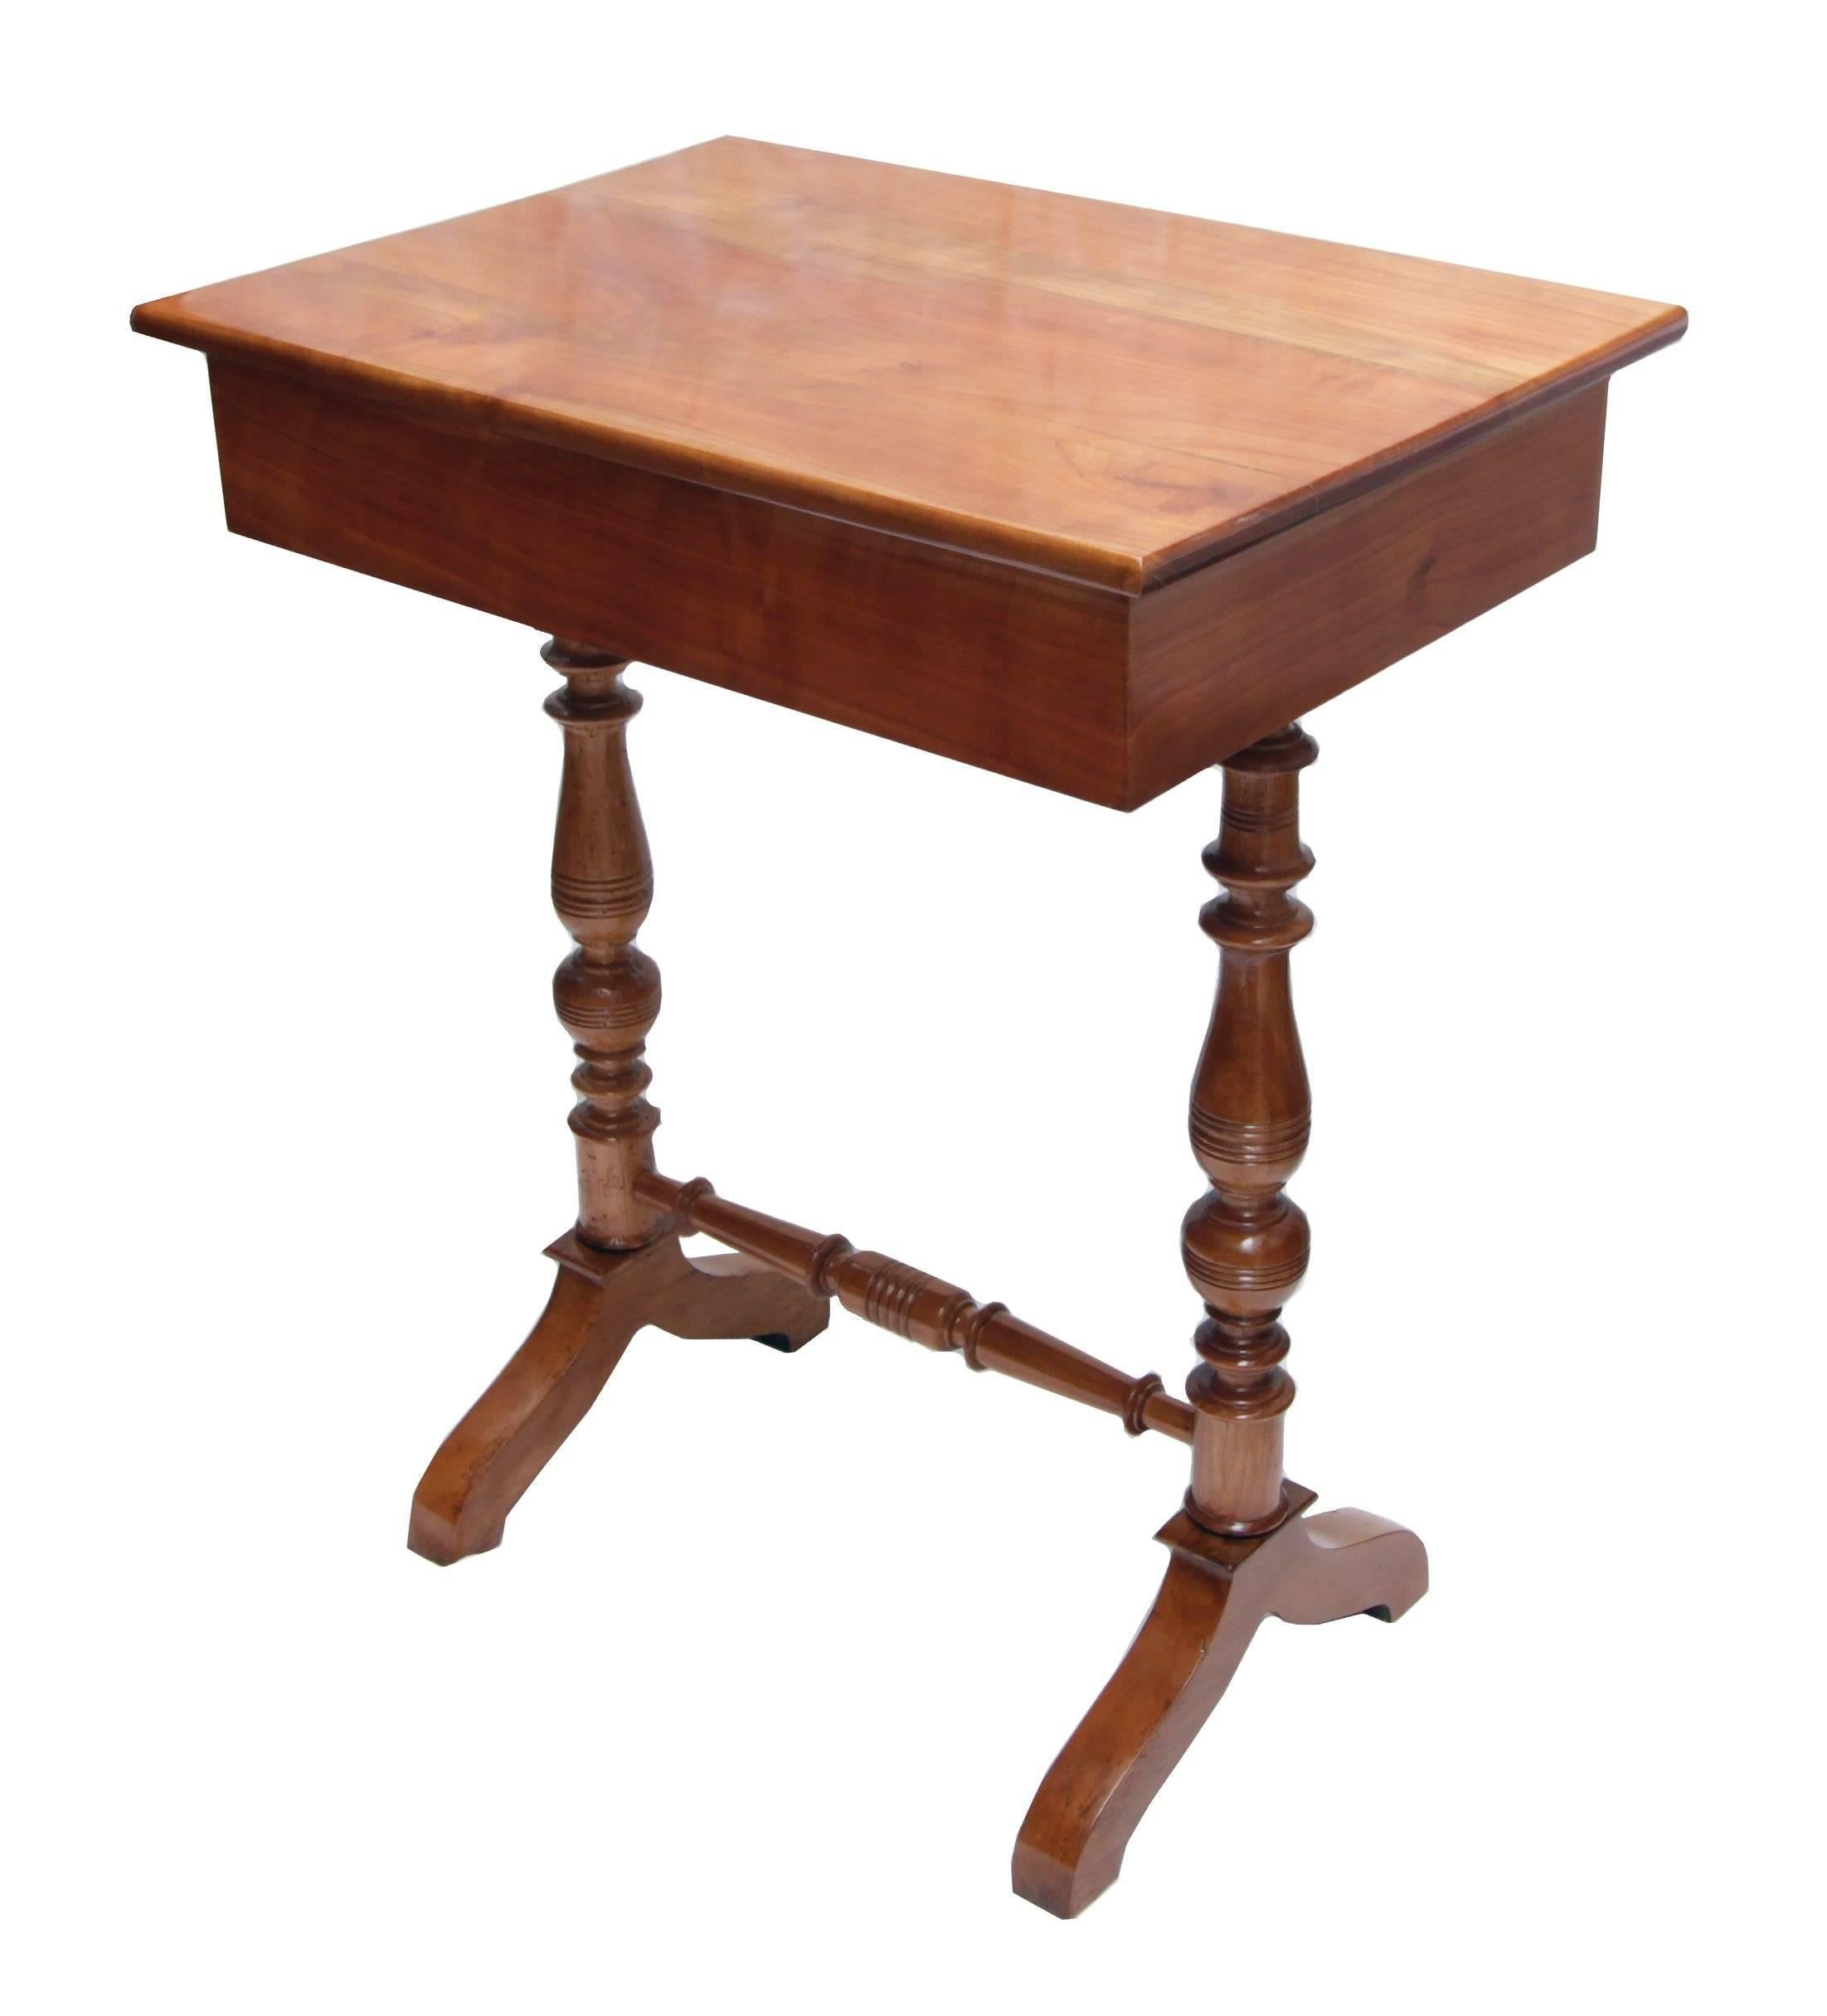 Very nice sewing / side table made of solid cherrywood. The table dates back to the late Biedermeier / Historicism period, more specifically from the time, circa 1850-1880. The interior (back, sides and bottom) of the drawer is made of pine wood as